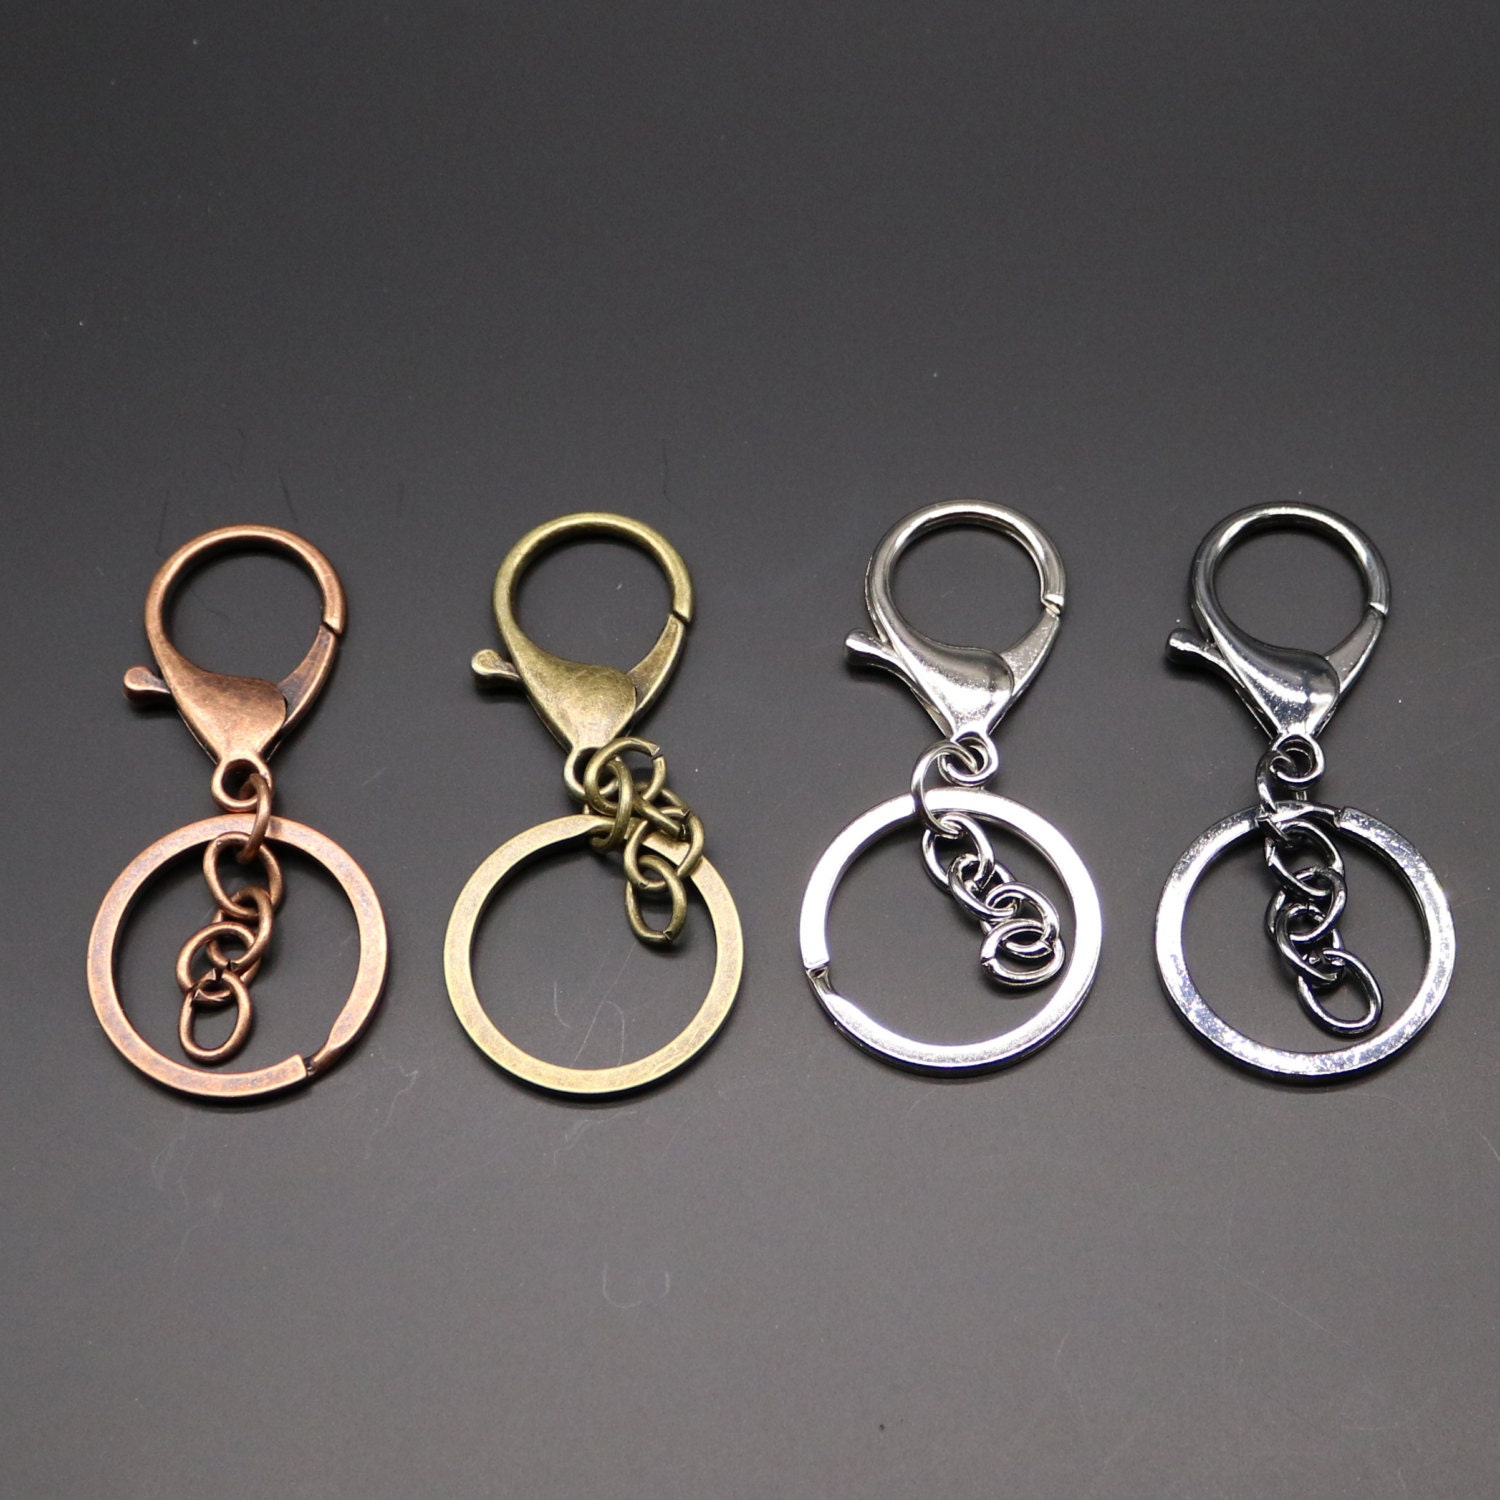 5 Keychain With Lobster Clasp,key Ring With Swivel Clasp,keychain  Hook,split Ring,key Holder,swivel Clip,key Ring Clasp,charms Keychain 